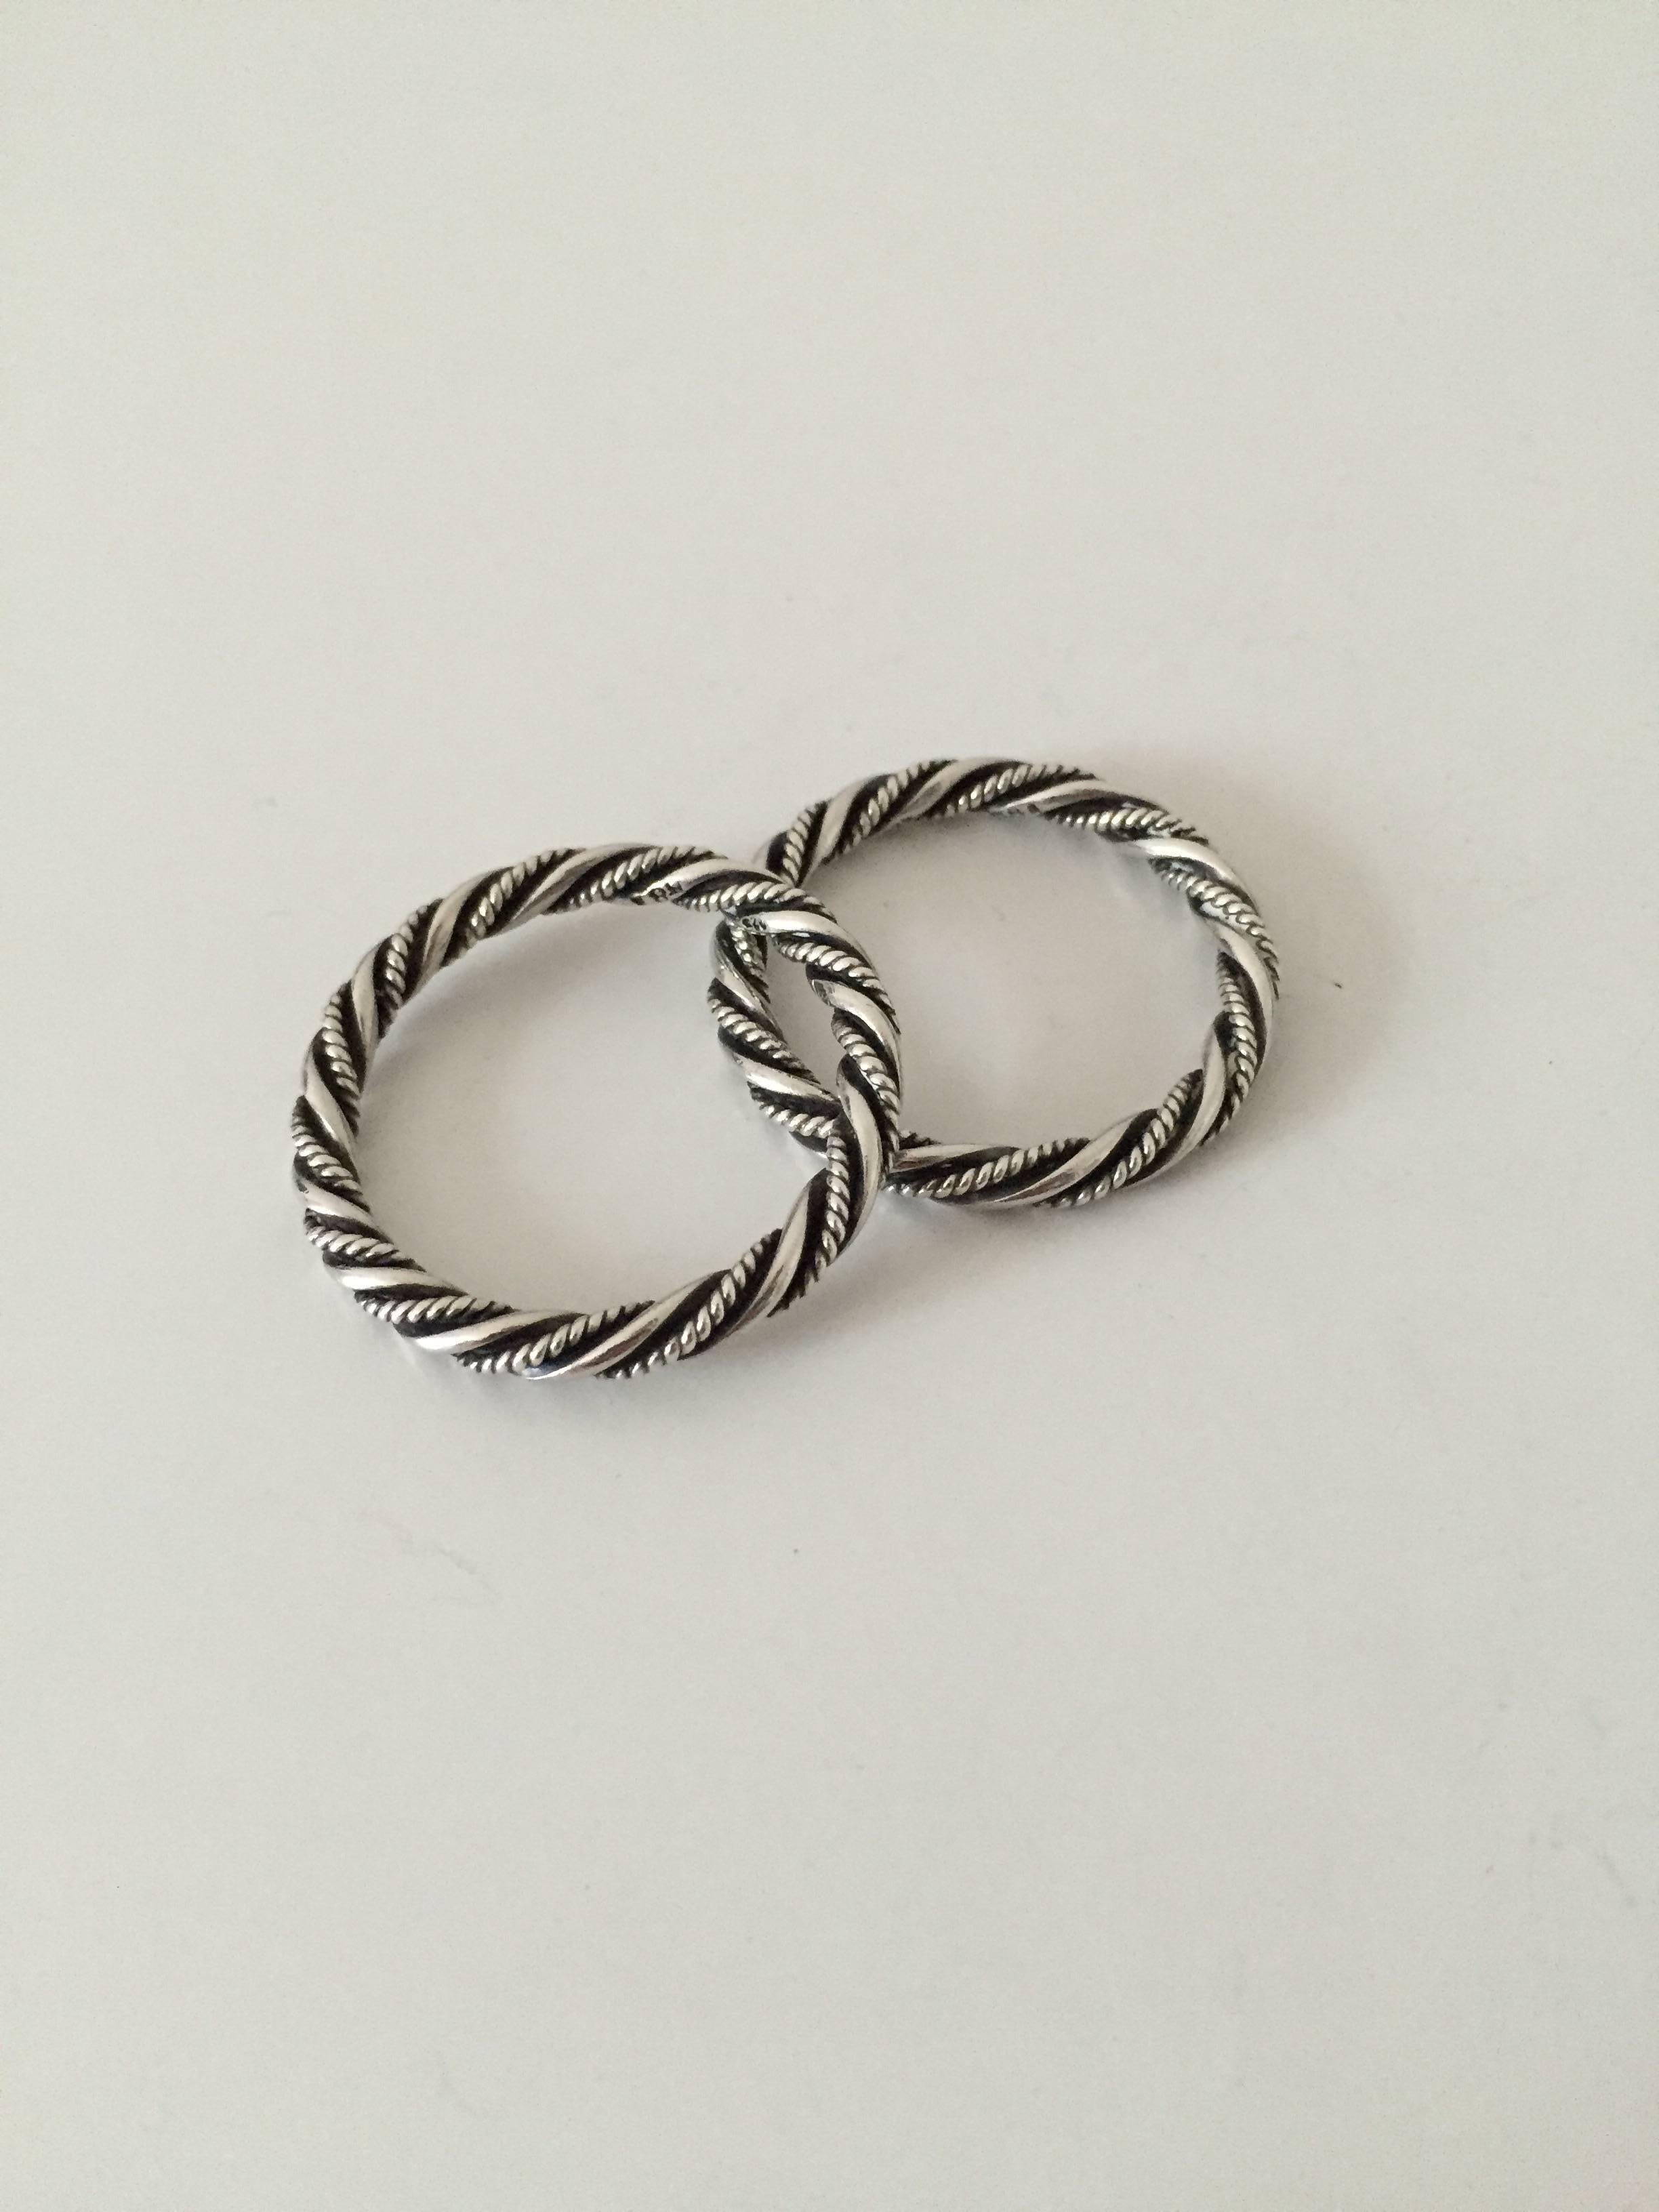 Georg Jensen pair of rings in sterling silver #58A. We are not sure of their use, but think of them as perfect as a little napkinring

Measures 3.5 cm (1 3/8